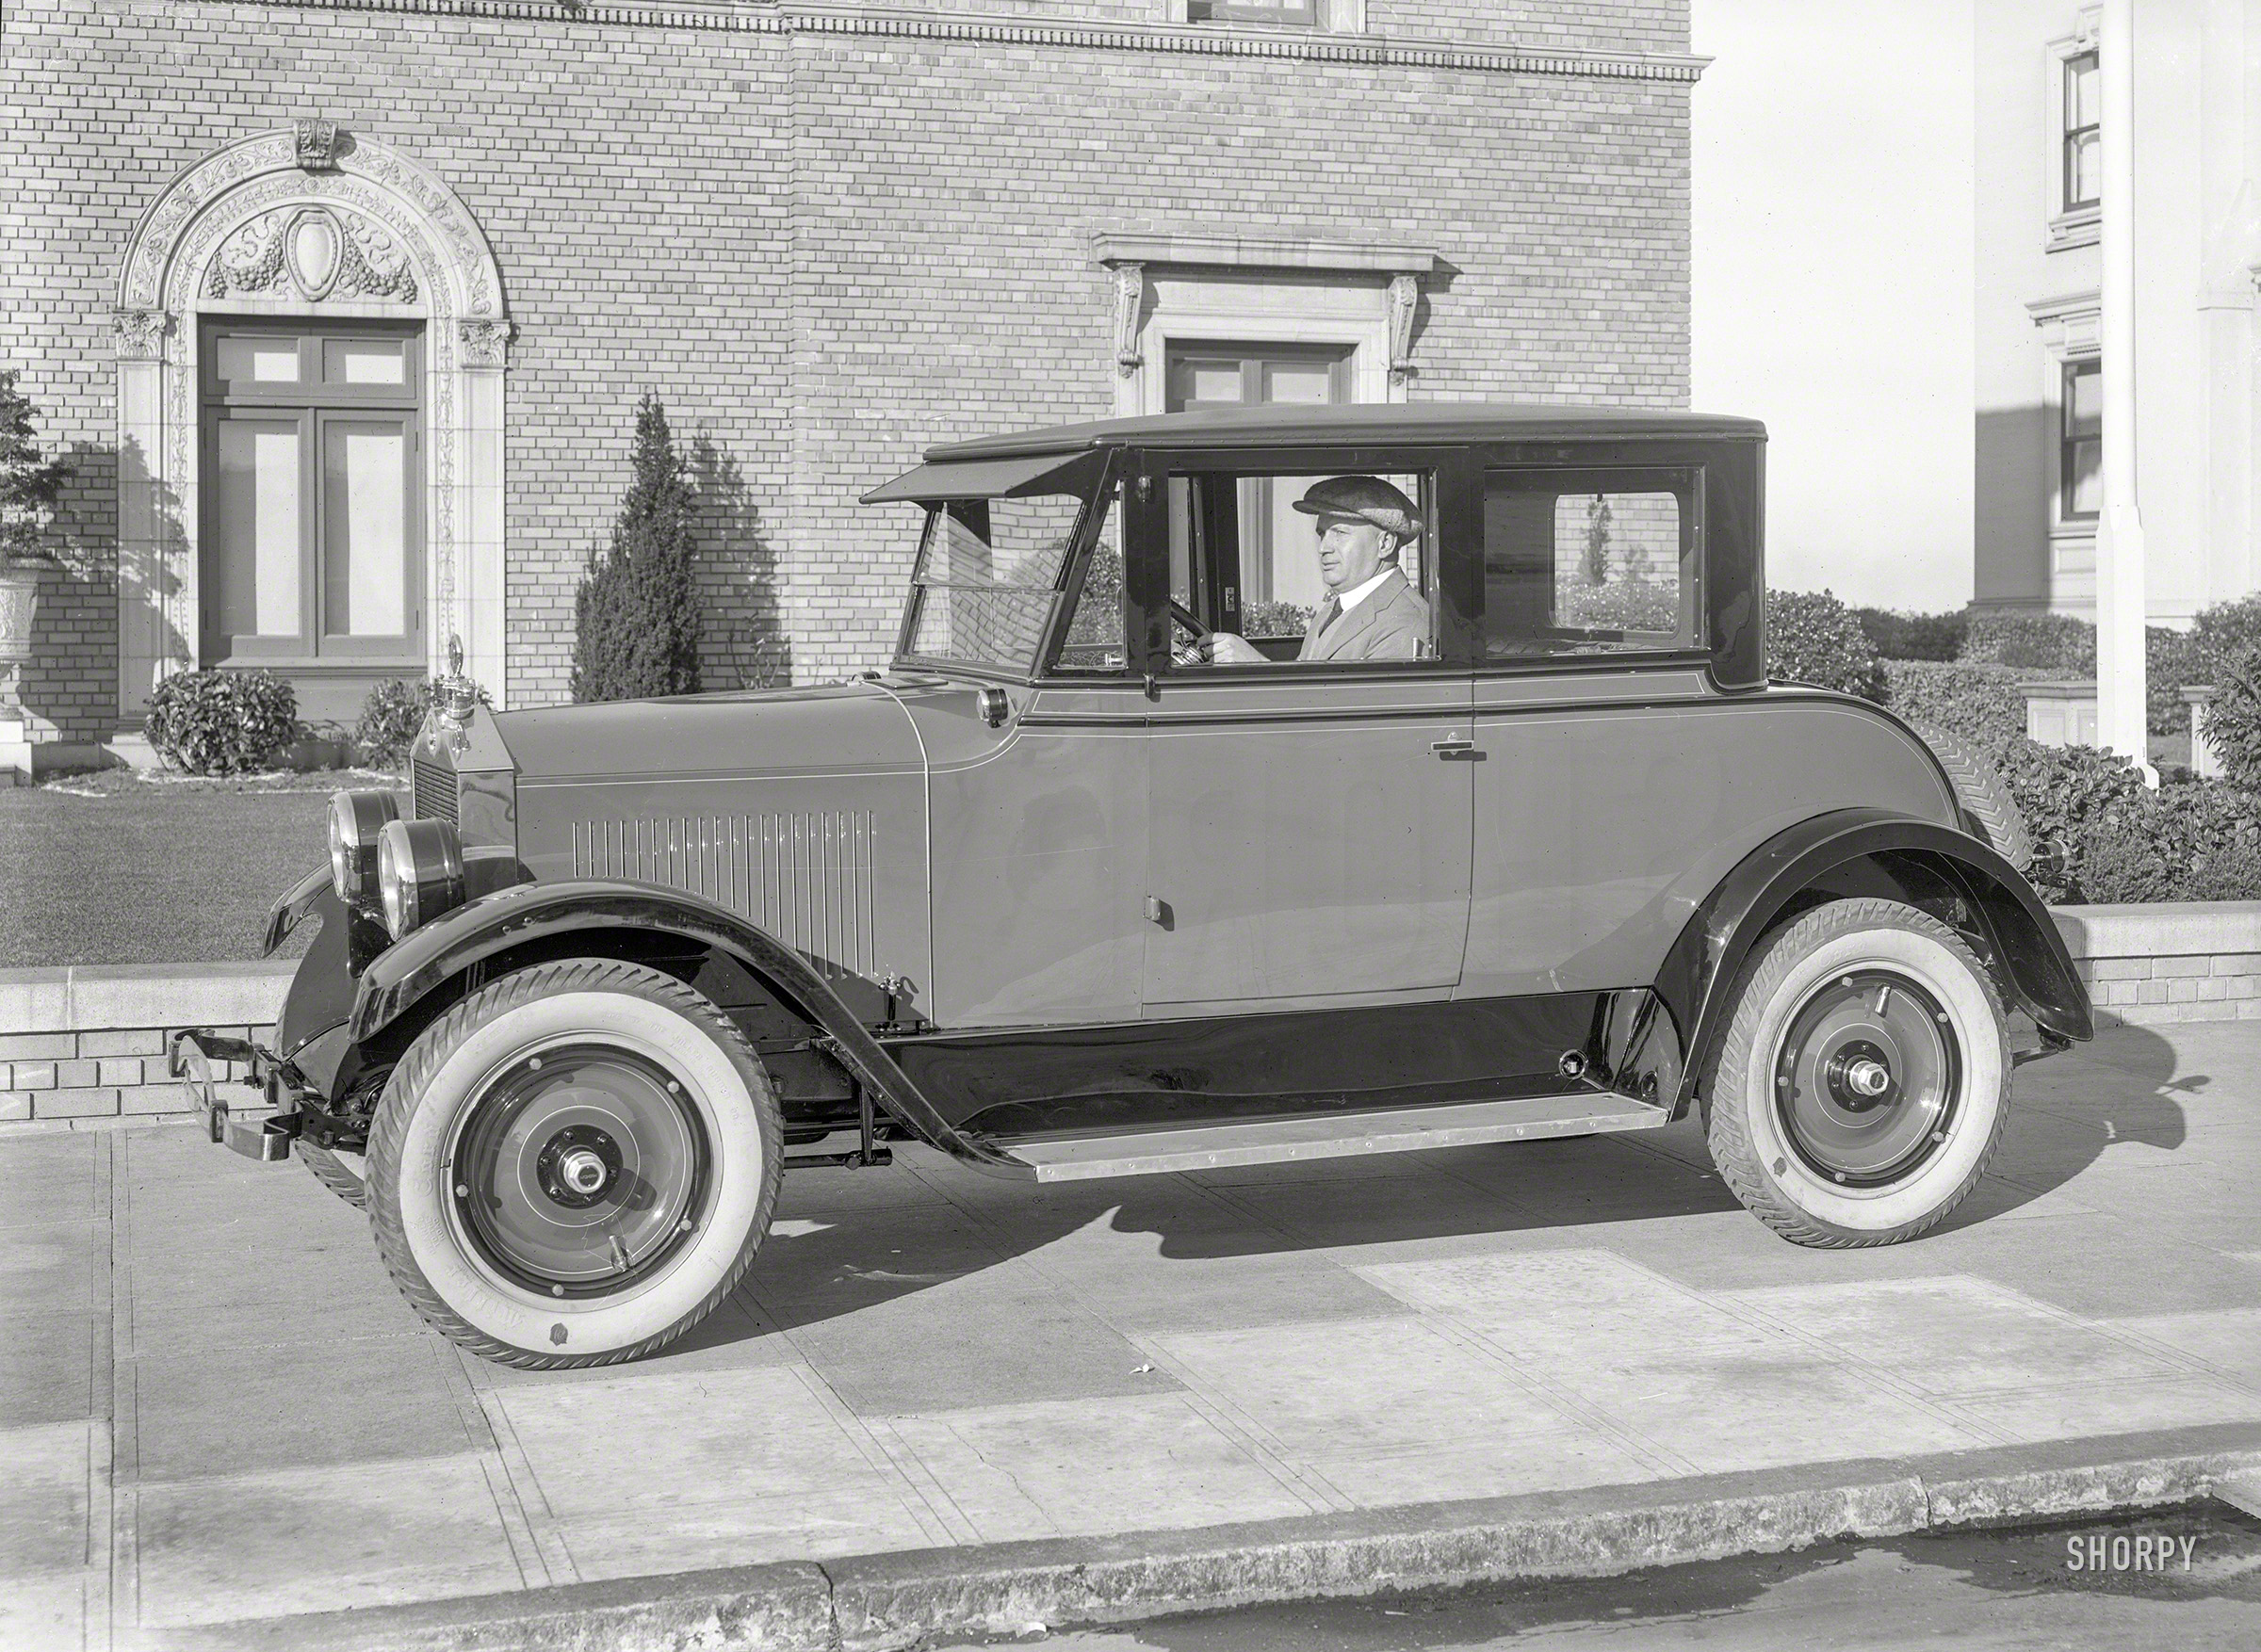 San Francisco circa 1920, back at 2150 Washington St. "Moon auto." And if you don't like my parking, get off the sidewalk! 5x7 glass negative. View full size.